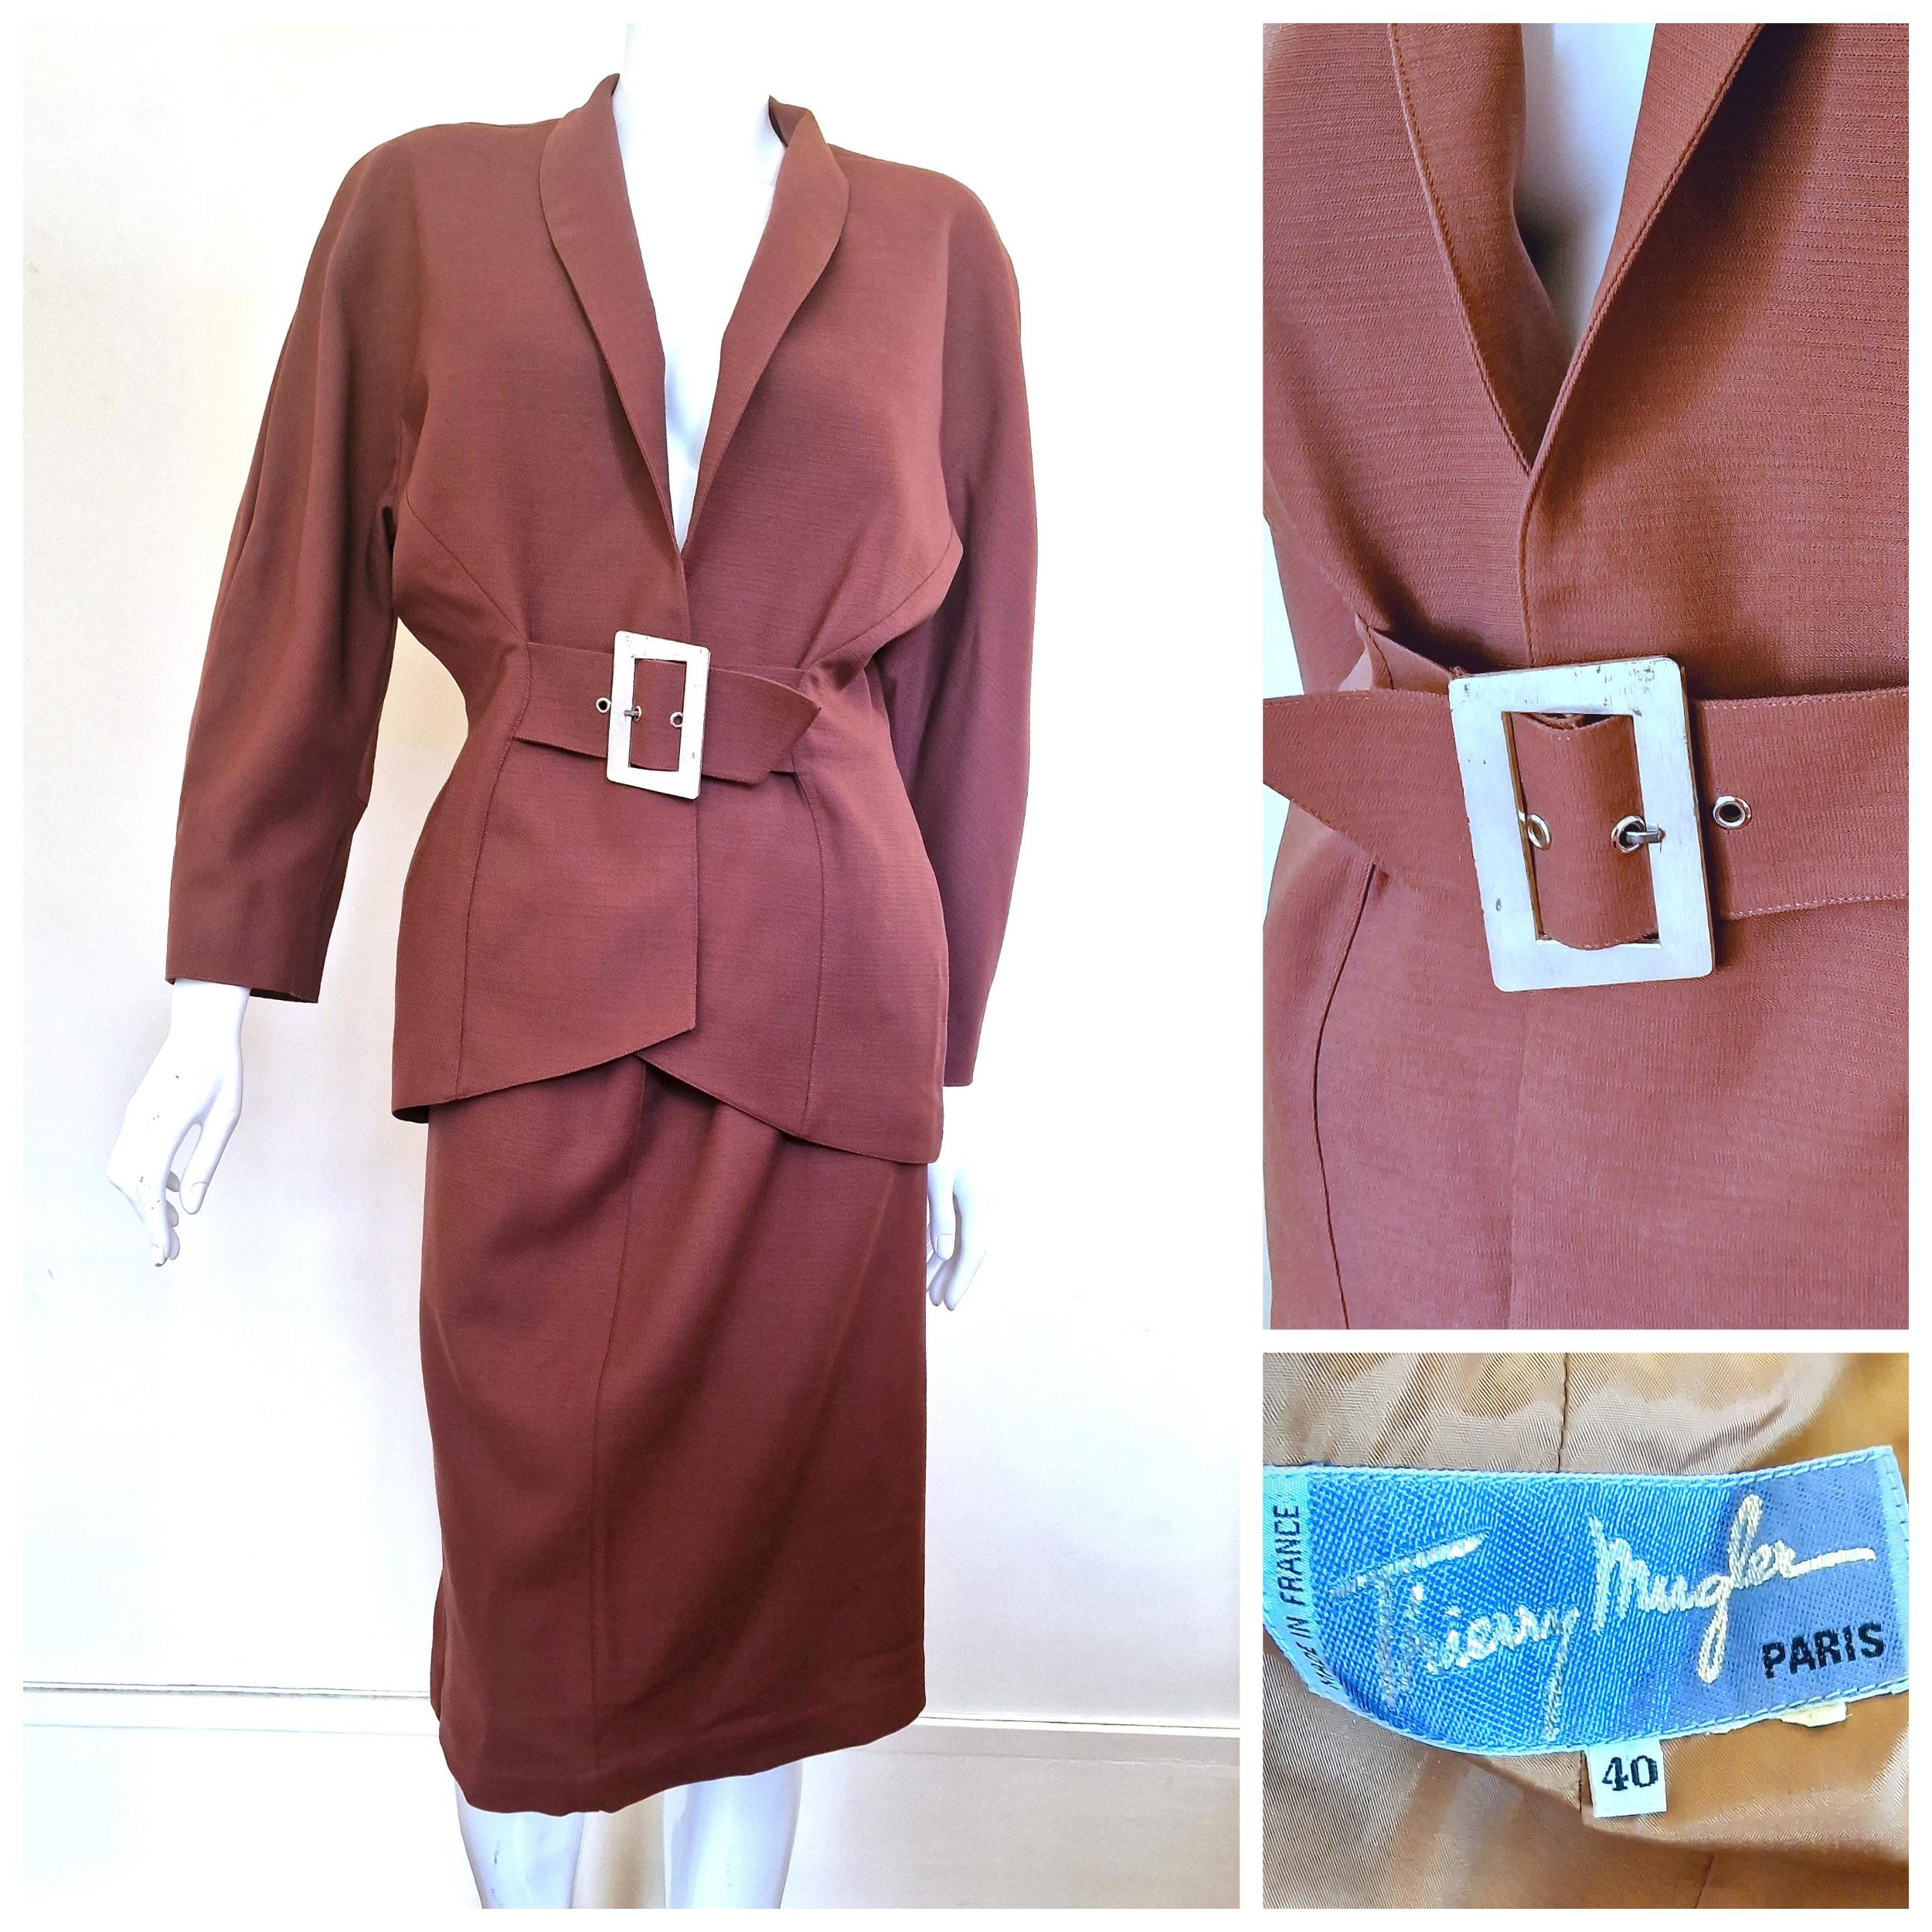 Metal belt suit by Thierry Mugler!
With shoulder pads.
Wondeful silhouette! It emphasizes the waist.
The collar can be worn as a usual or stood up.

VERY GOOD condition!
The jacket has label, the skirt no. The metal belt has light sign of use,